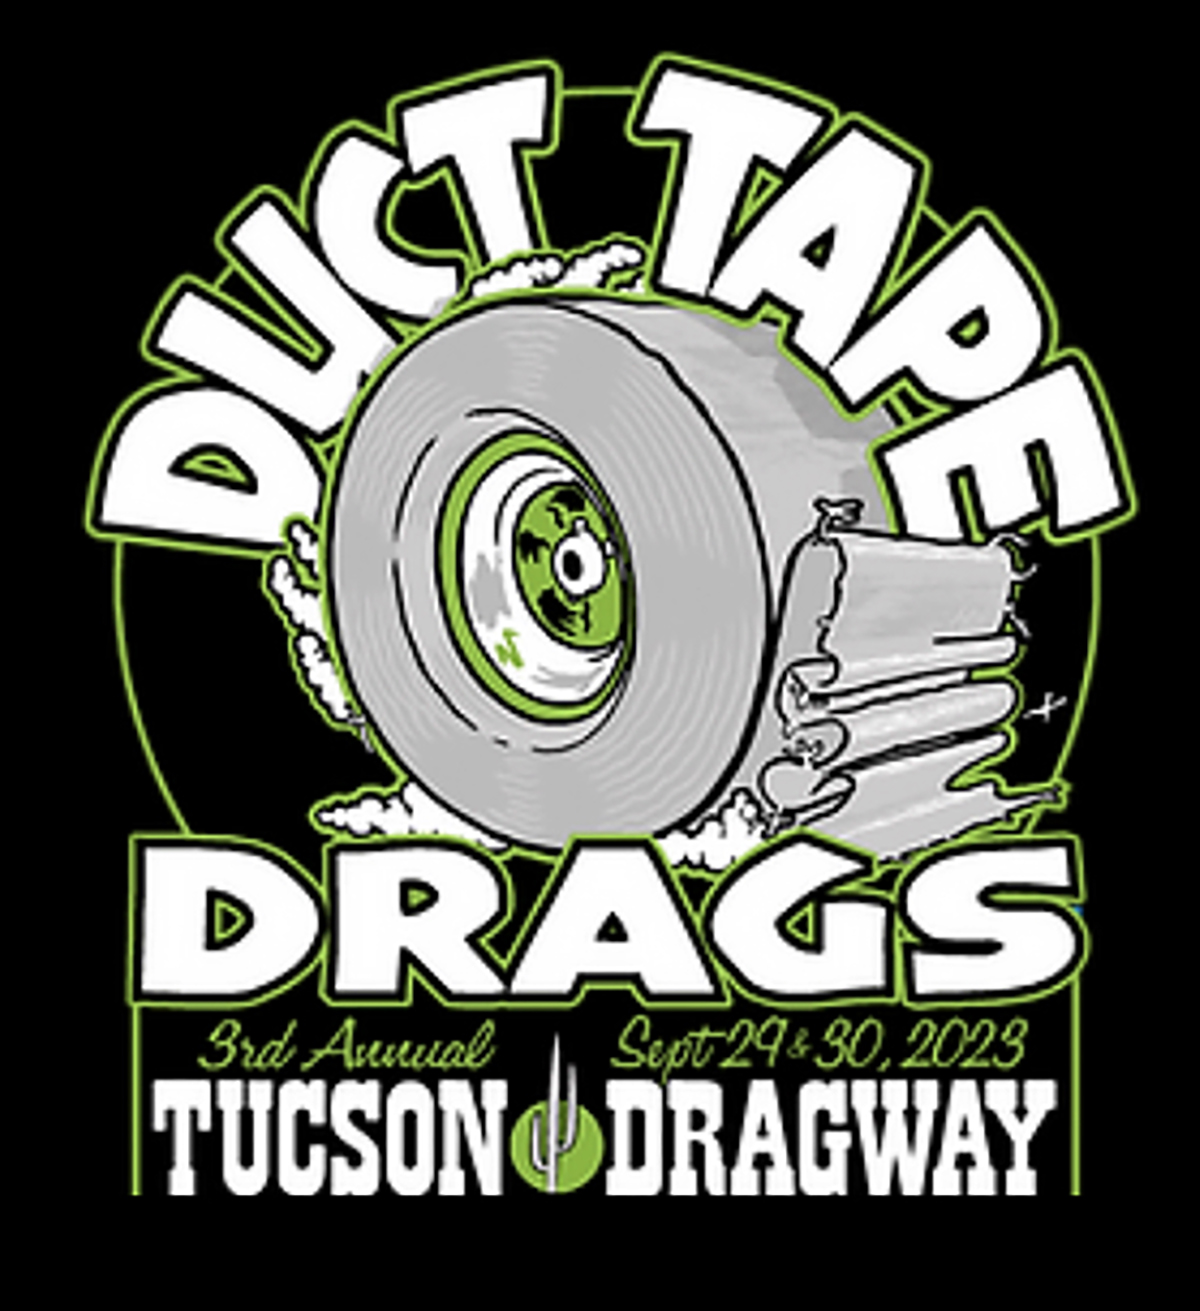 Duct Tape Drags